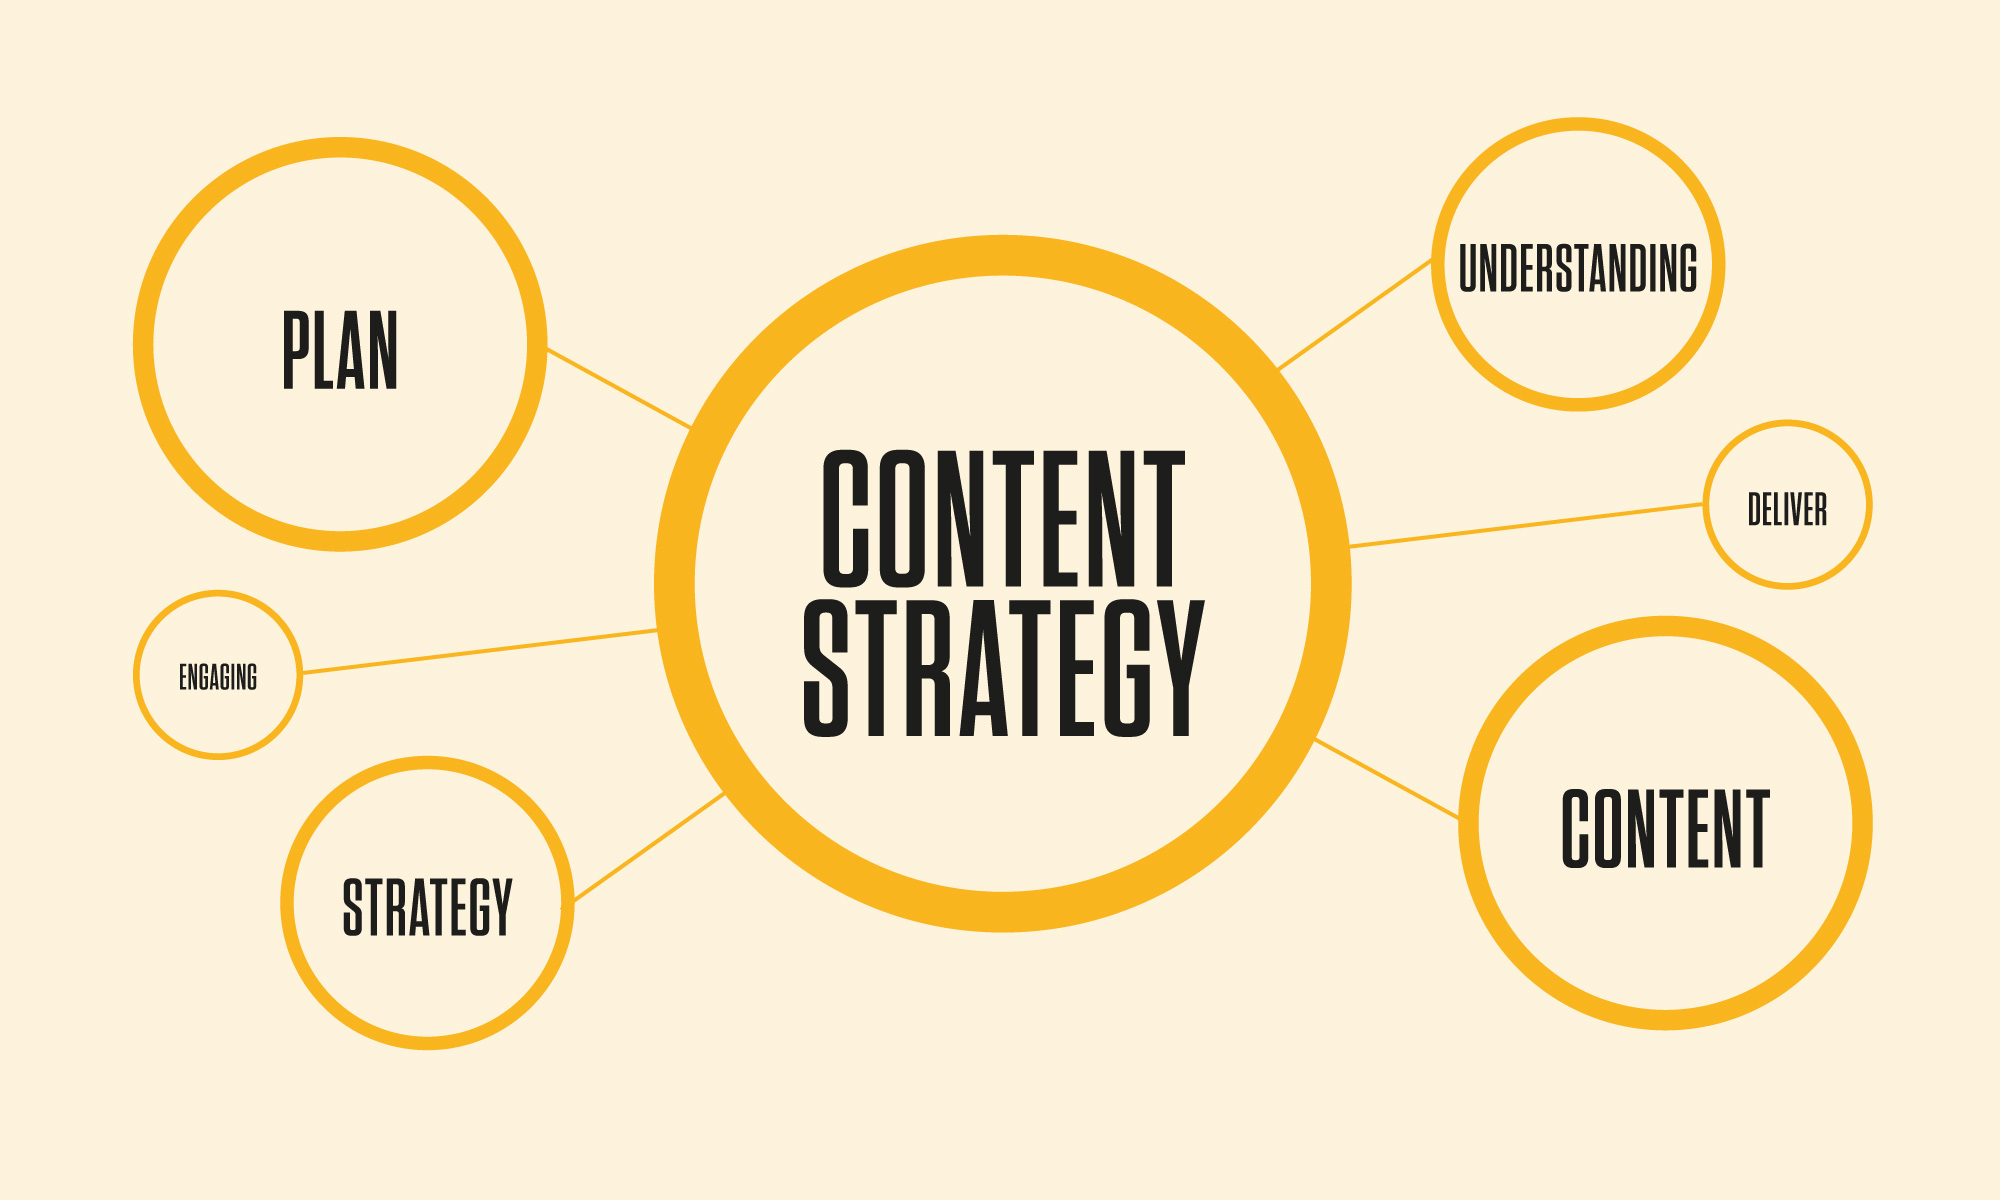 Content strategy is important with social media management 